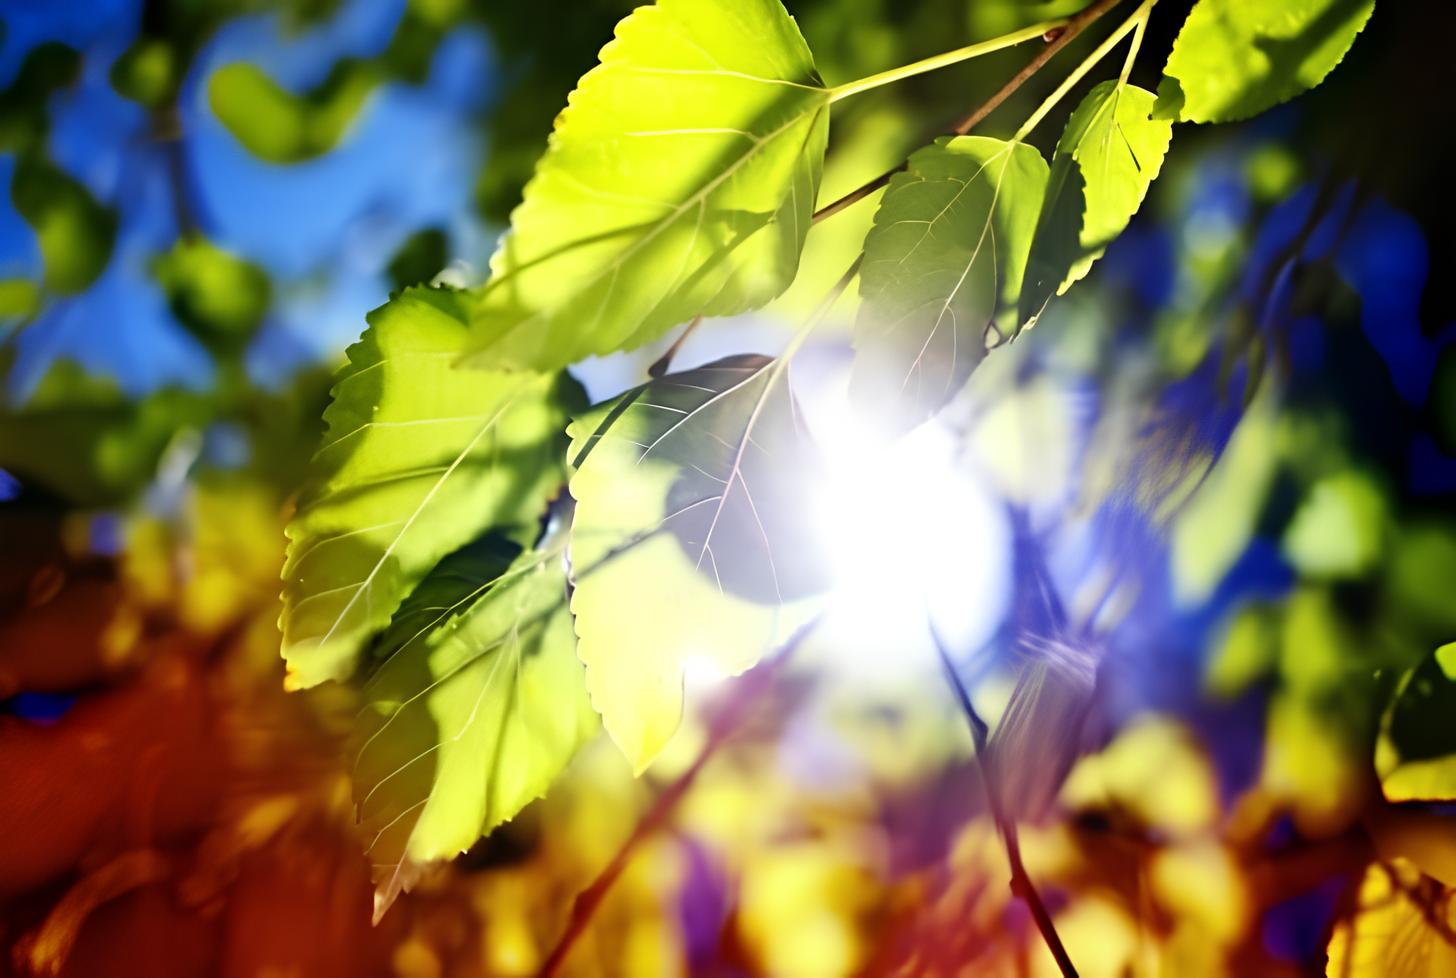 Photosynthesis Basics: Understanding Why Blue Light Is Optimal For Photosynthesis